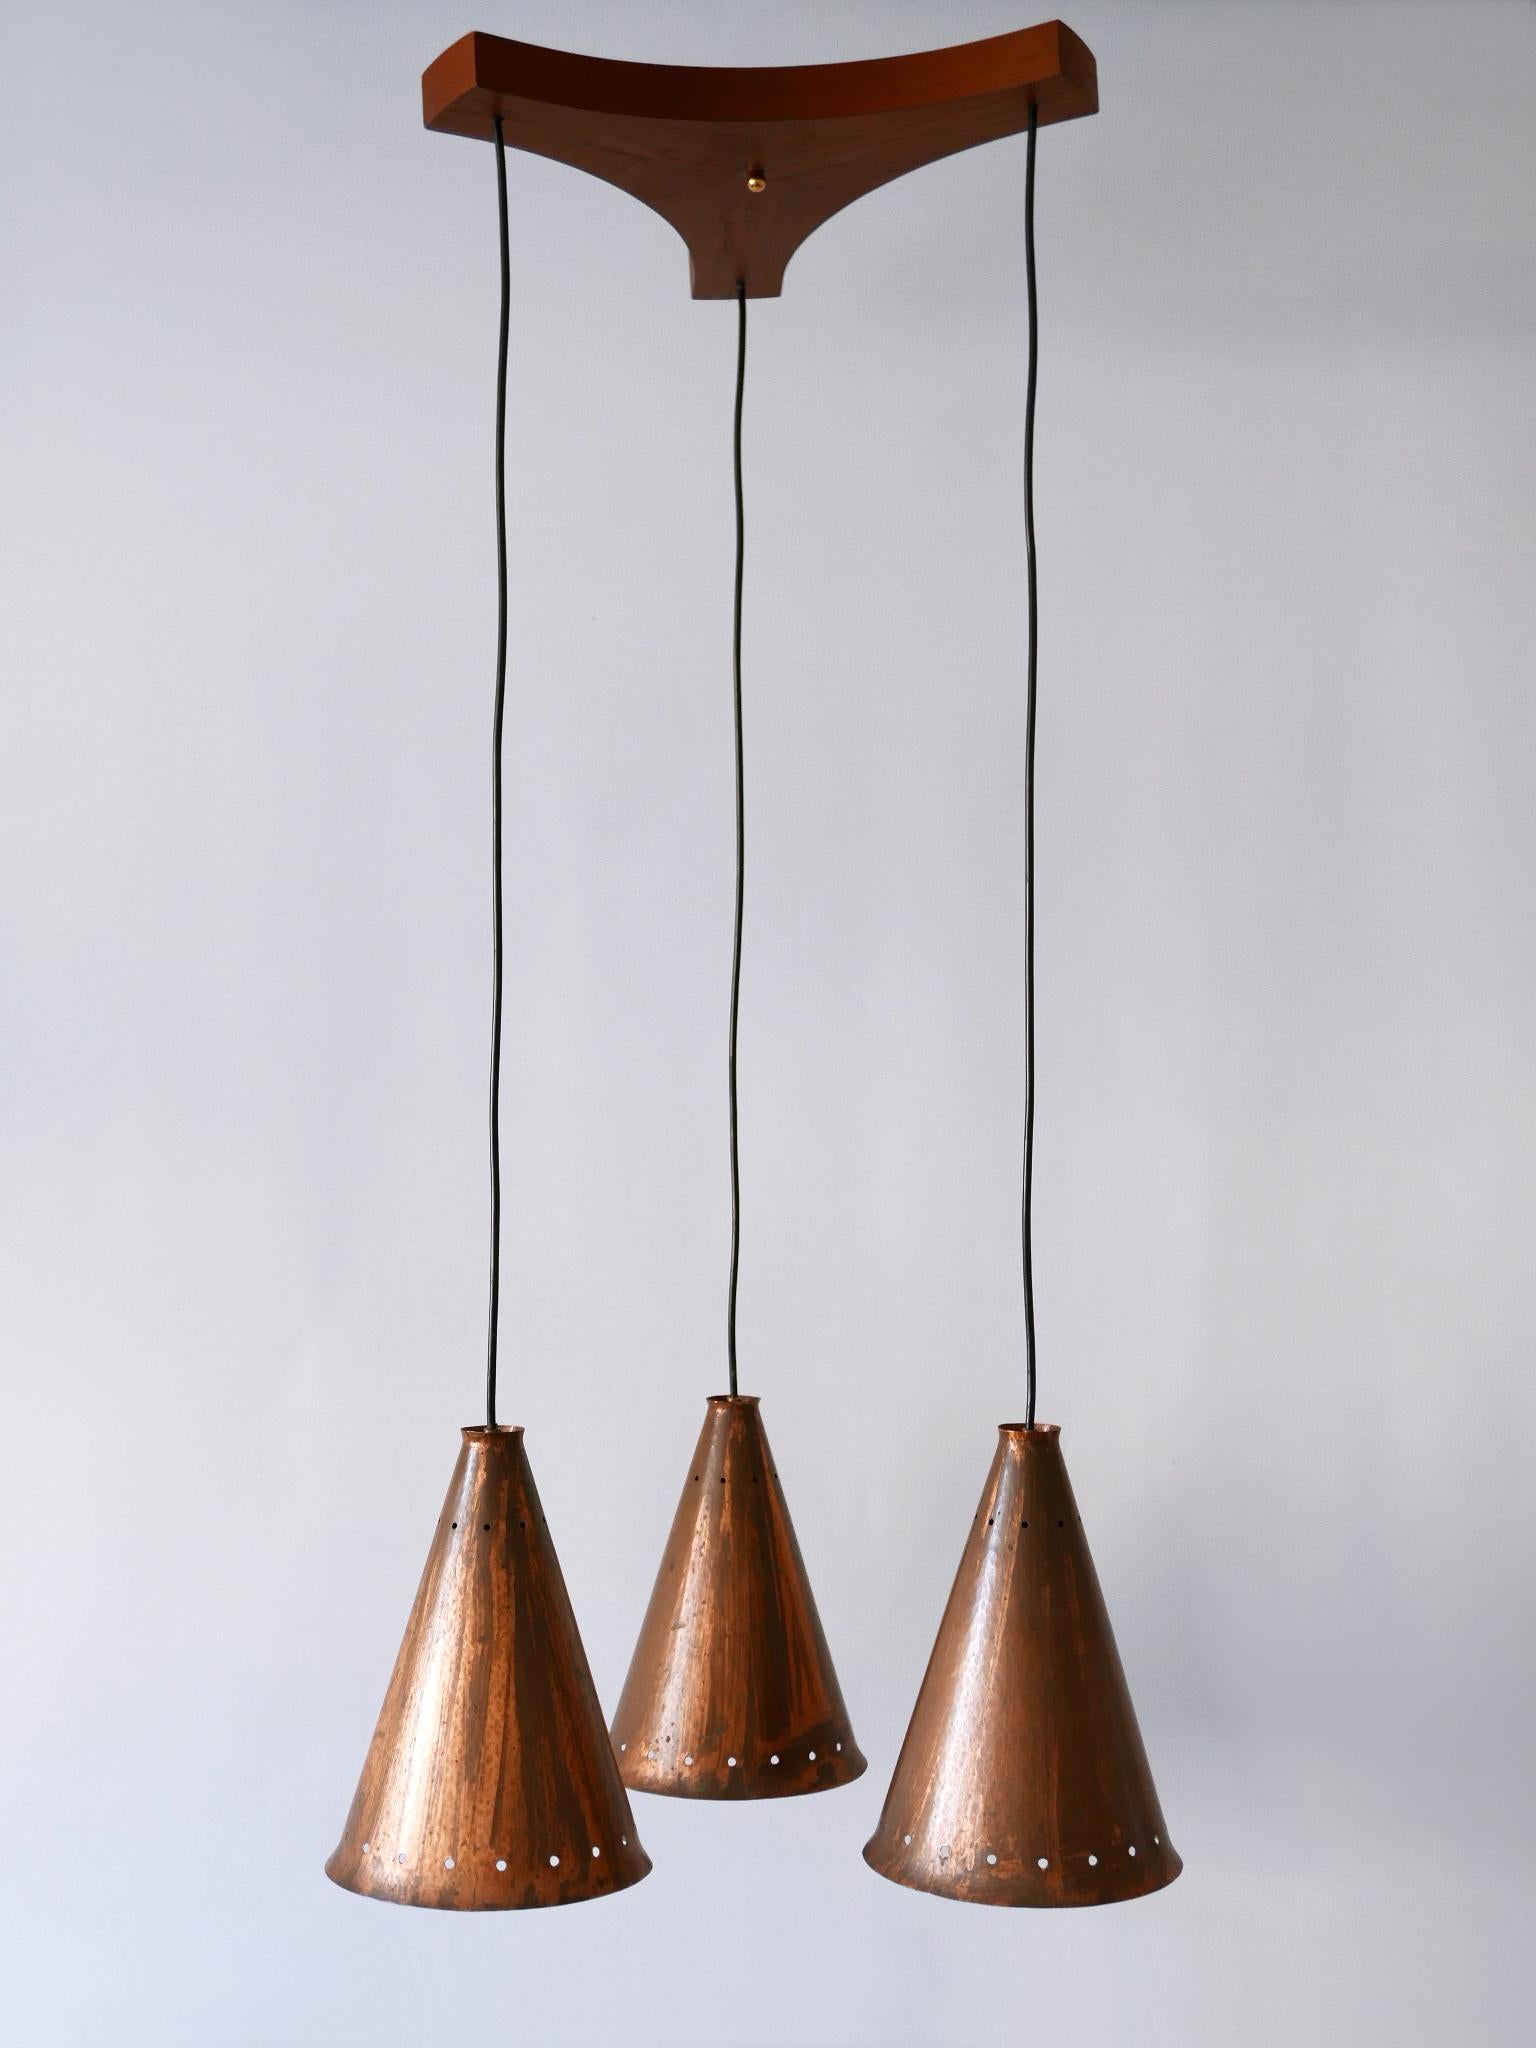 Exceptional & Large Mid-Century Modern Copper Pendant Lamp Scandinavia, 1950s For Sale 12